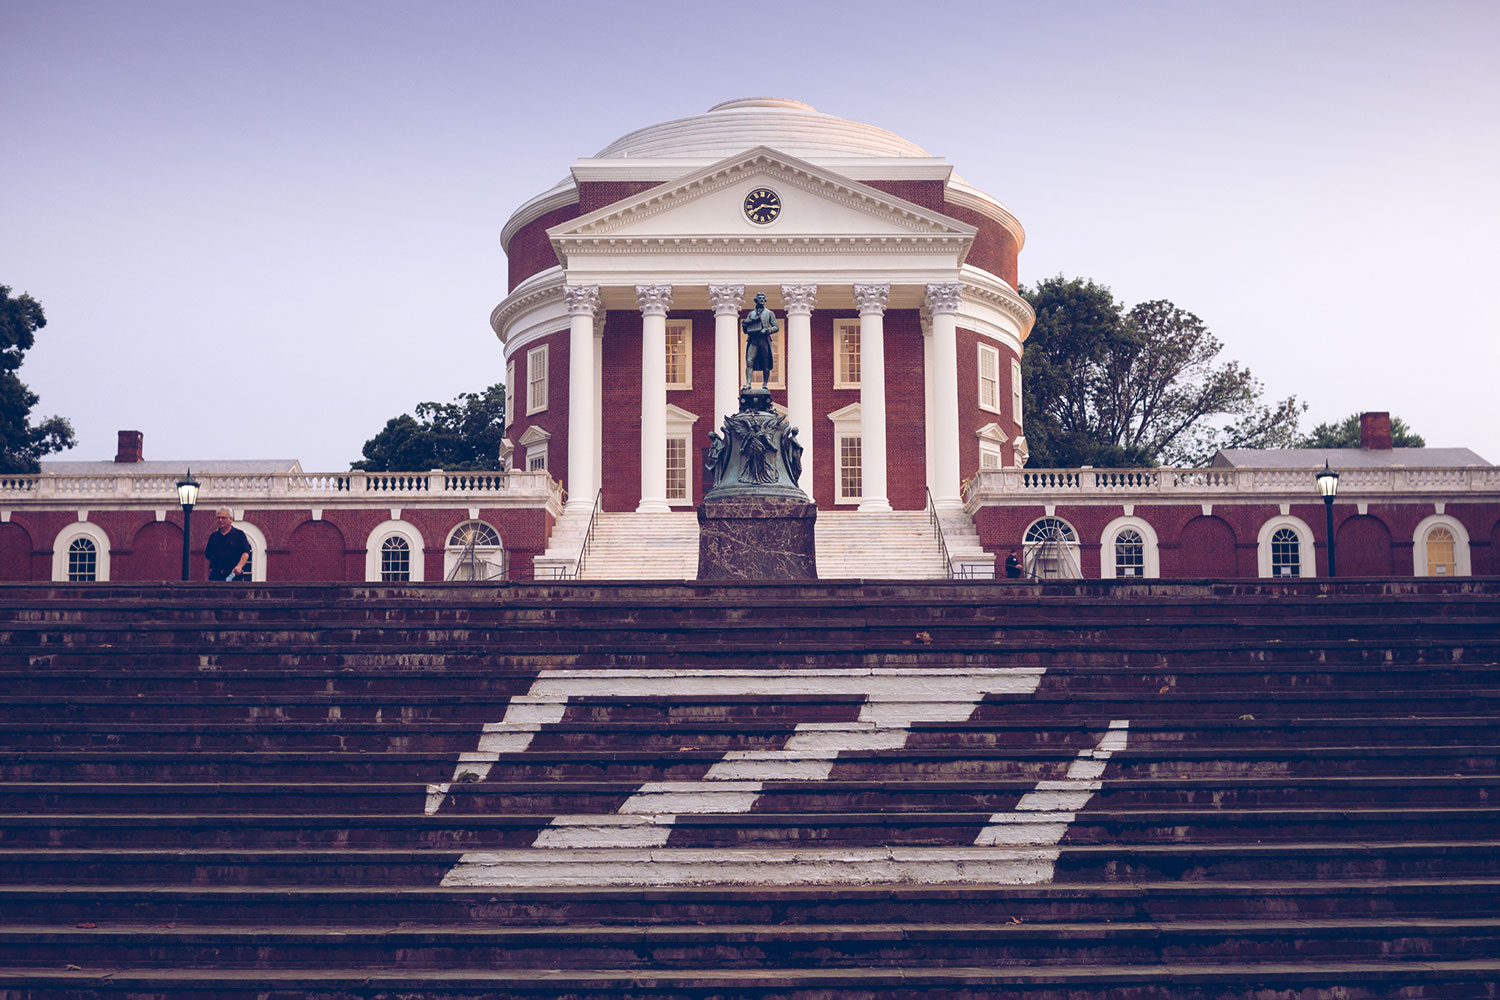 The Rotunda and Thomas Jeffersons statue in front with a big white z on the steps